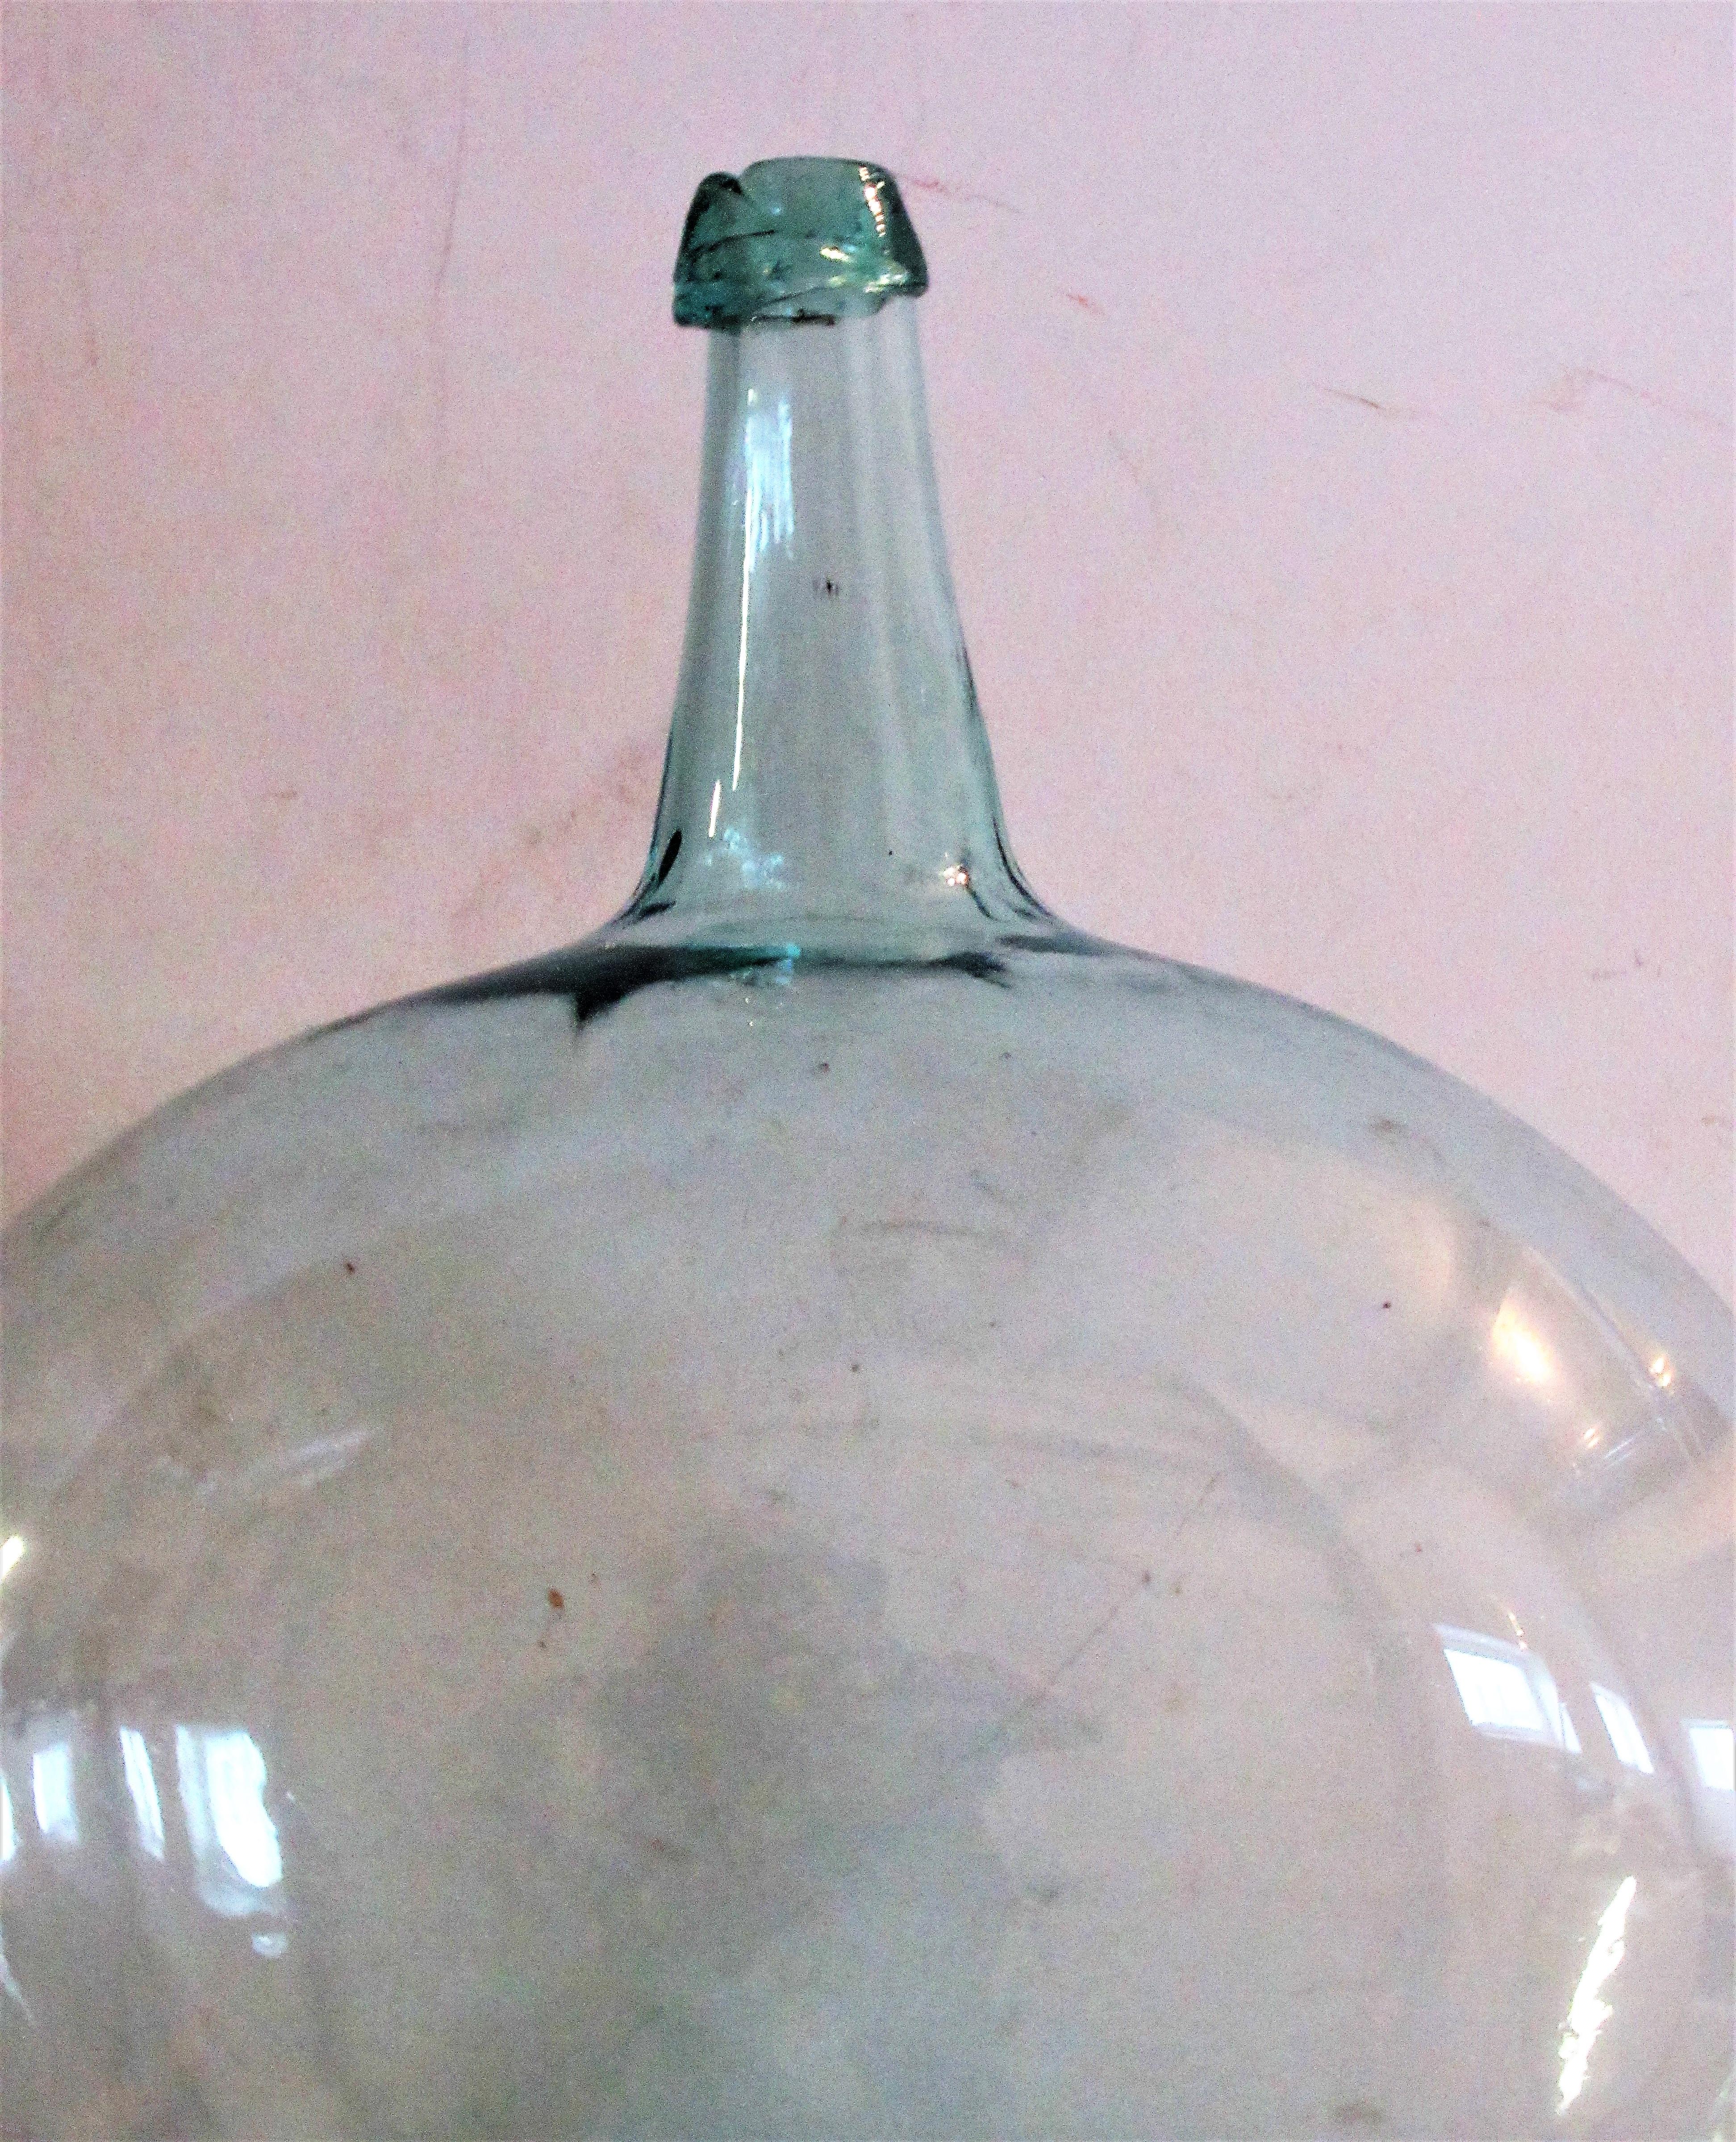 Early antique pale aqua blown glass demijohn bottle with a bold exaggerated sculptural bulbous form and a very deep dished pontil. From an old private collection -most likely Western New York State in origin dating anywhere from the late 18th